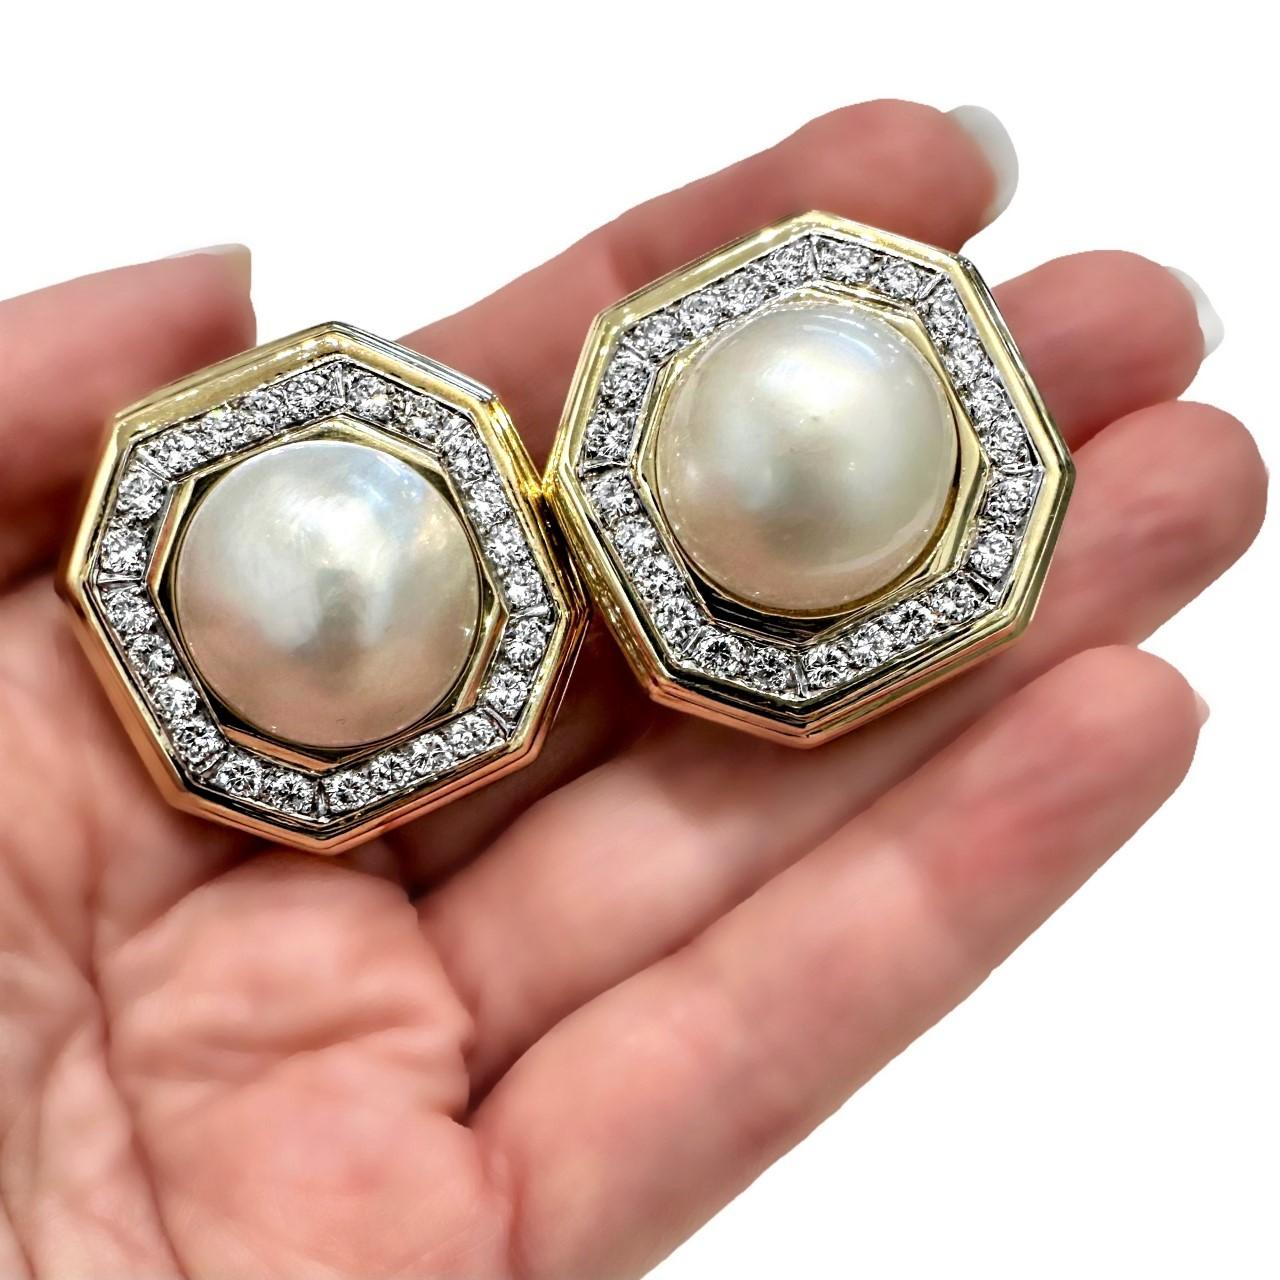 Grand Scale Earrings in Gold, Platinum, Mabe Pearl, & Diamonds by Wander, France For Sale 2